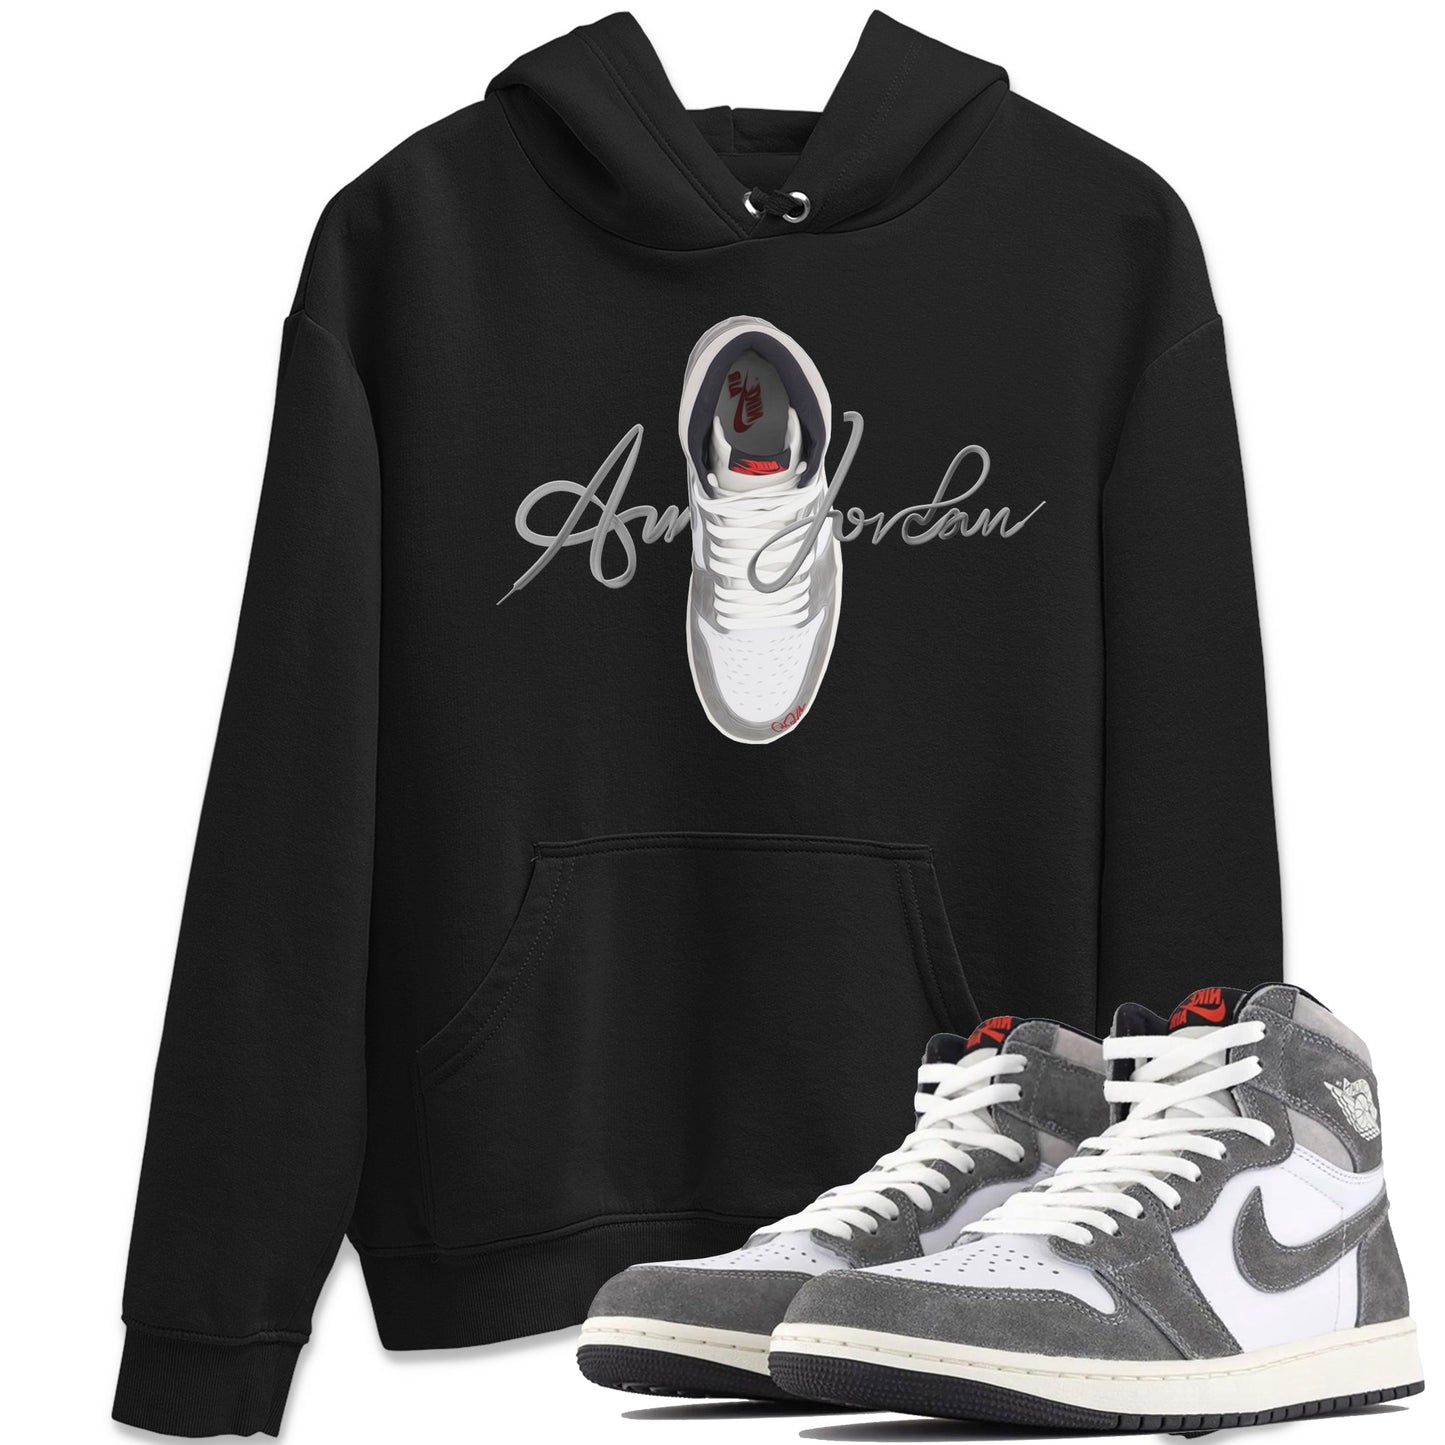 Air Jordan 1 Washed Heritage Sneaker Match Tees Caligraphy Shoe Lace Shirts AJ1 Washed Heritage Drip Gear Zone Unisex Shirts Black 1